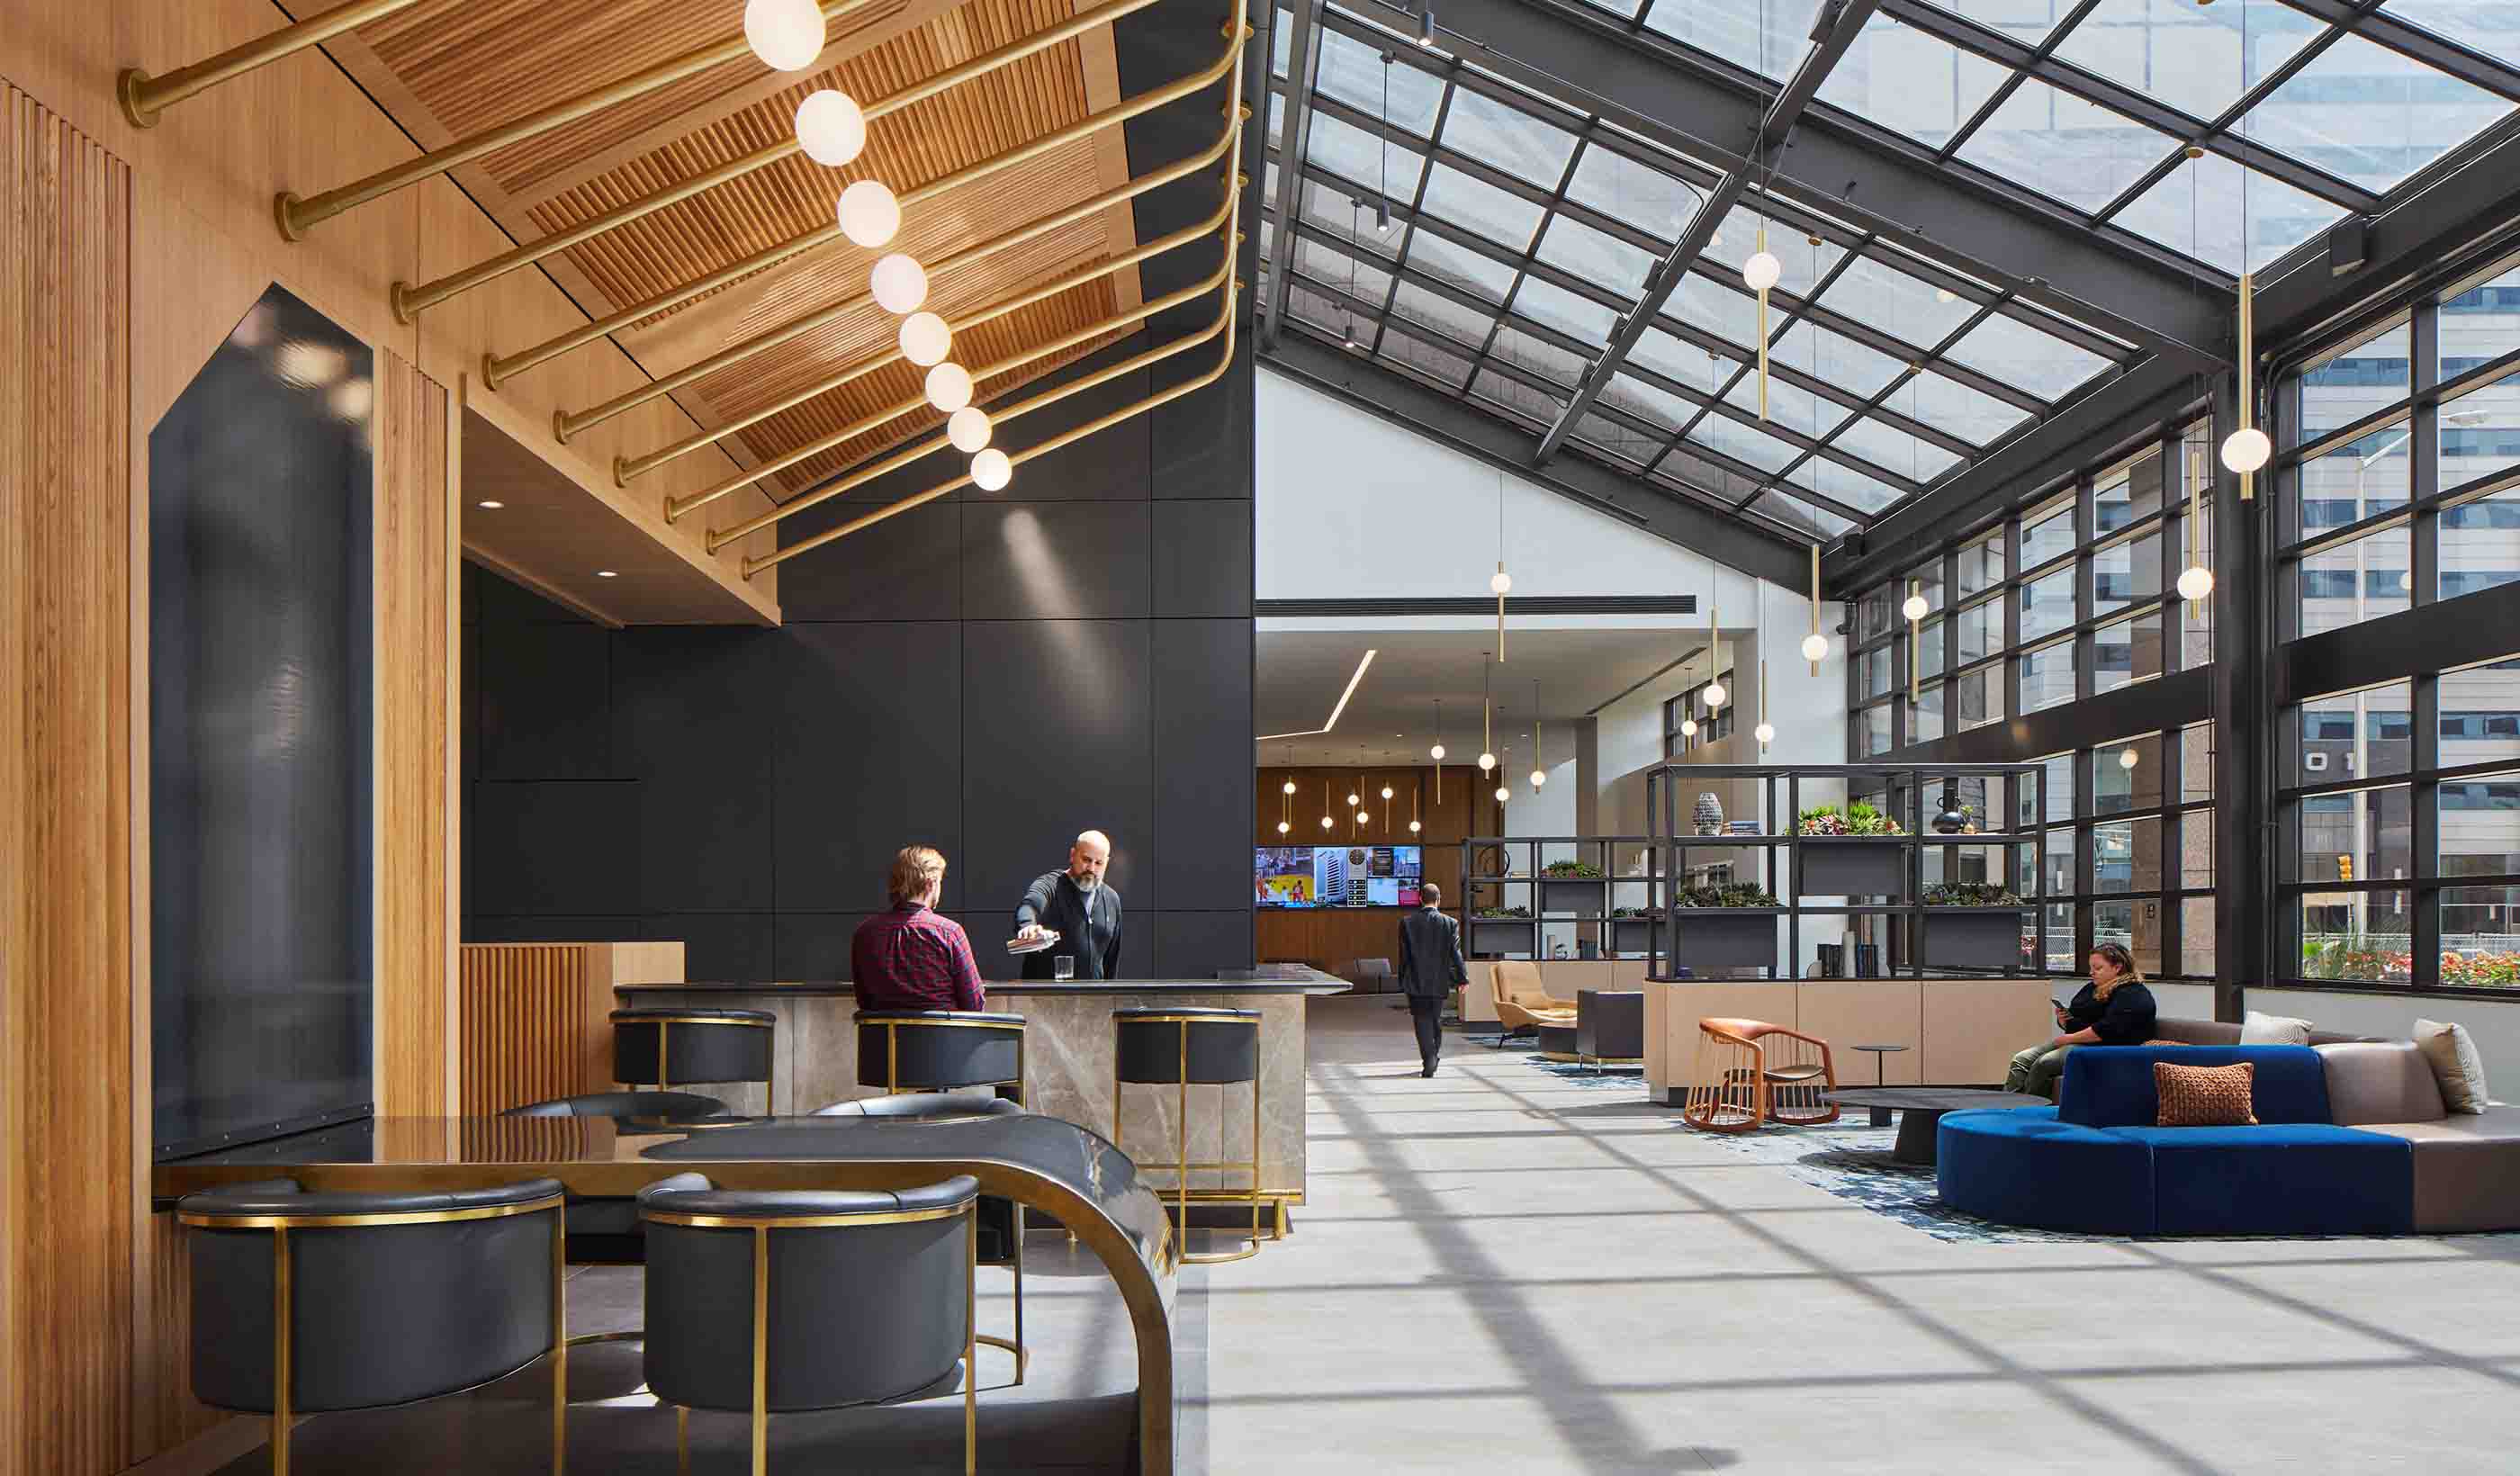 Workplace Reboot: A glass concourse transformed creates an urban, big city vibe